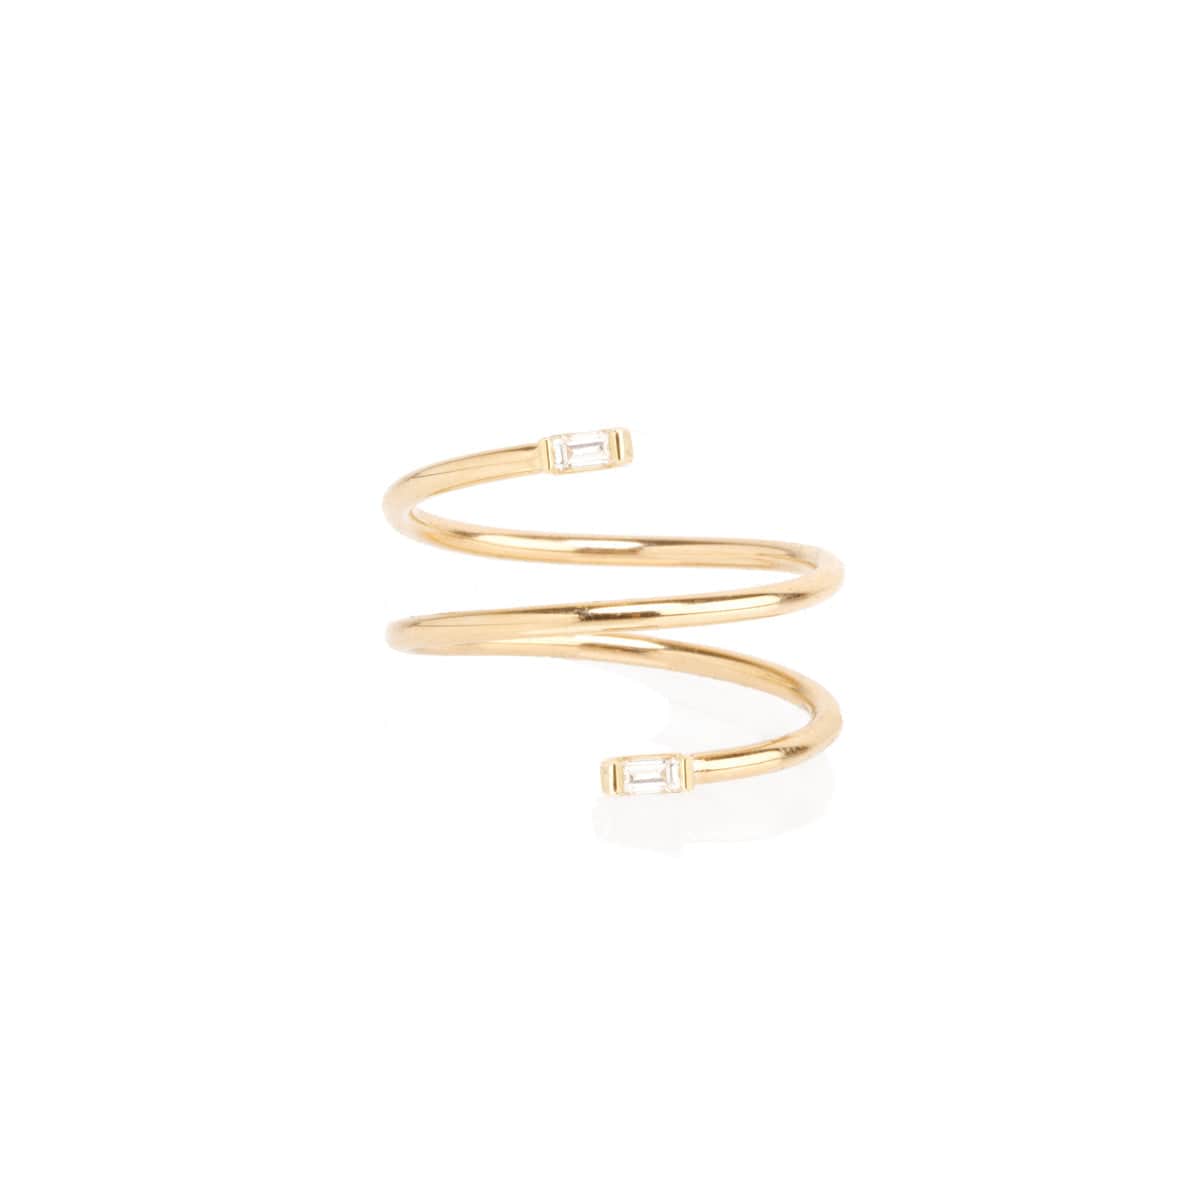 RNG-DIA 14k Gold Wrap Around Ring with Baguette Diamonds